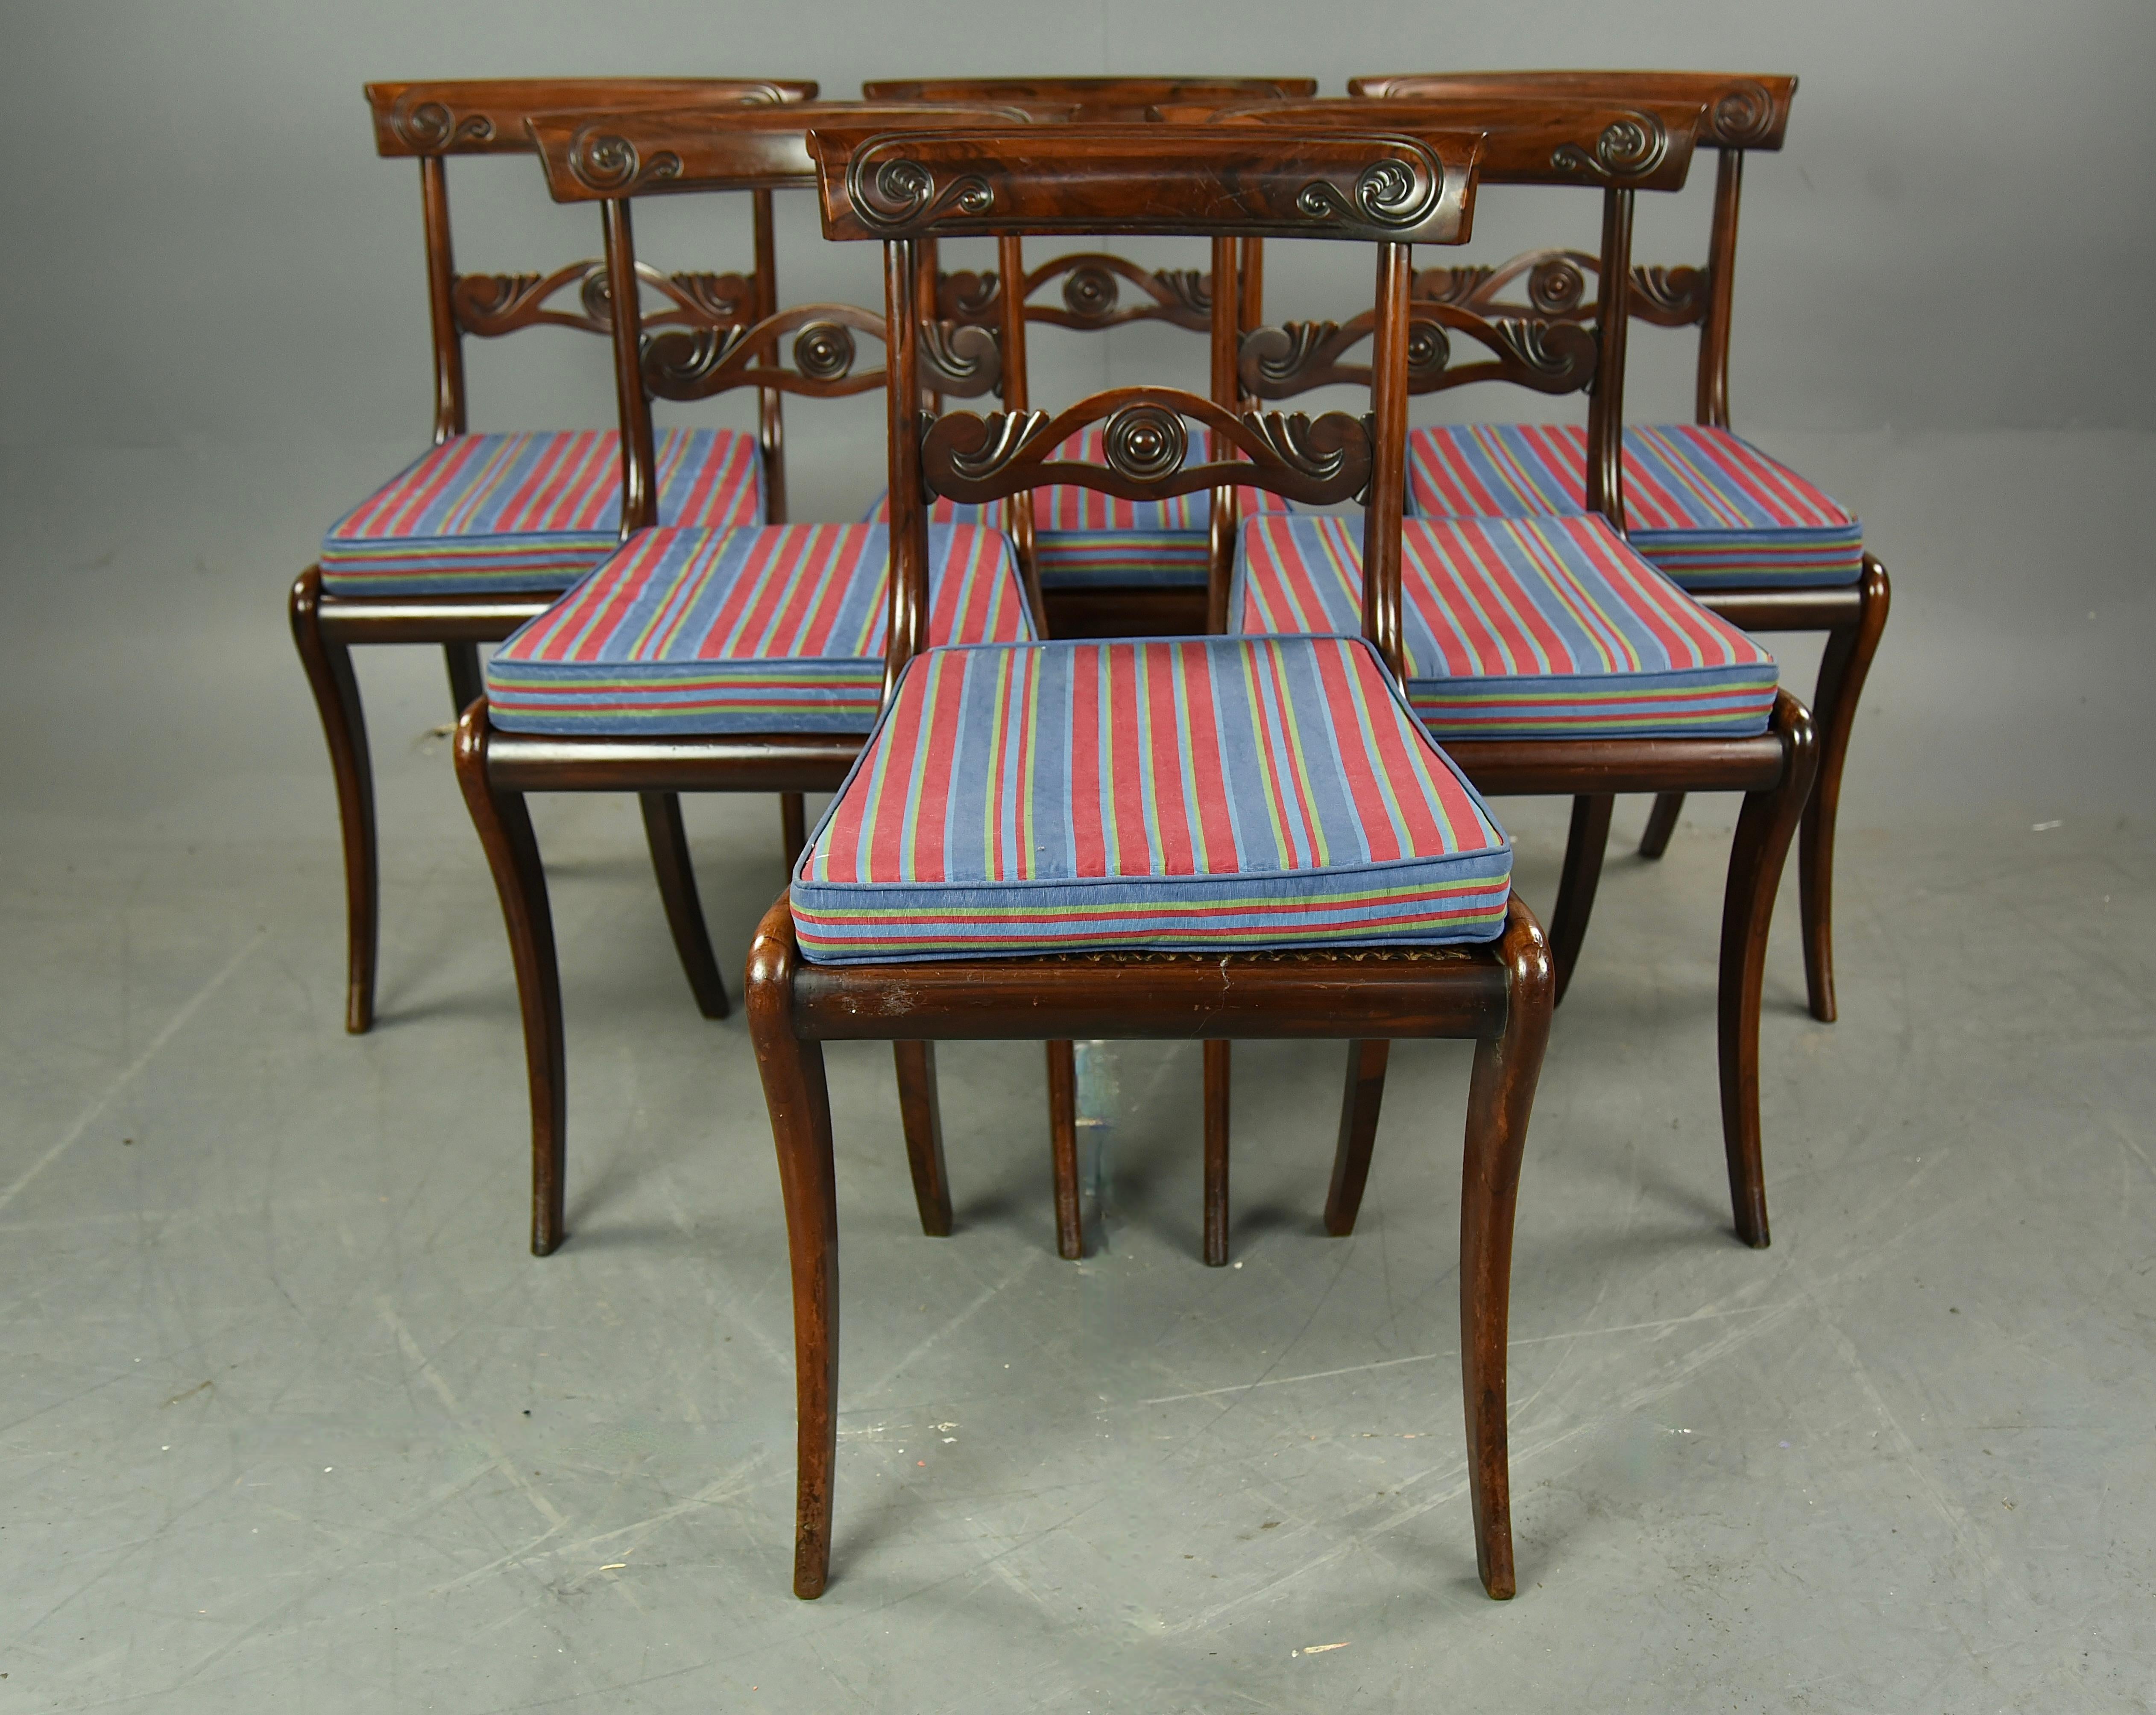 Fabulous set of six Regency rosewood dining chairs circa 1820 .
The chairs are in very good condition and are all solid in joint .
They are constructed of solid rosewood through out with well figured hand carved back rails .
The cane seats are all